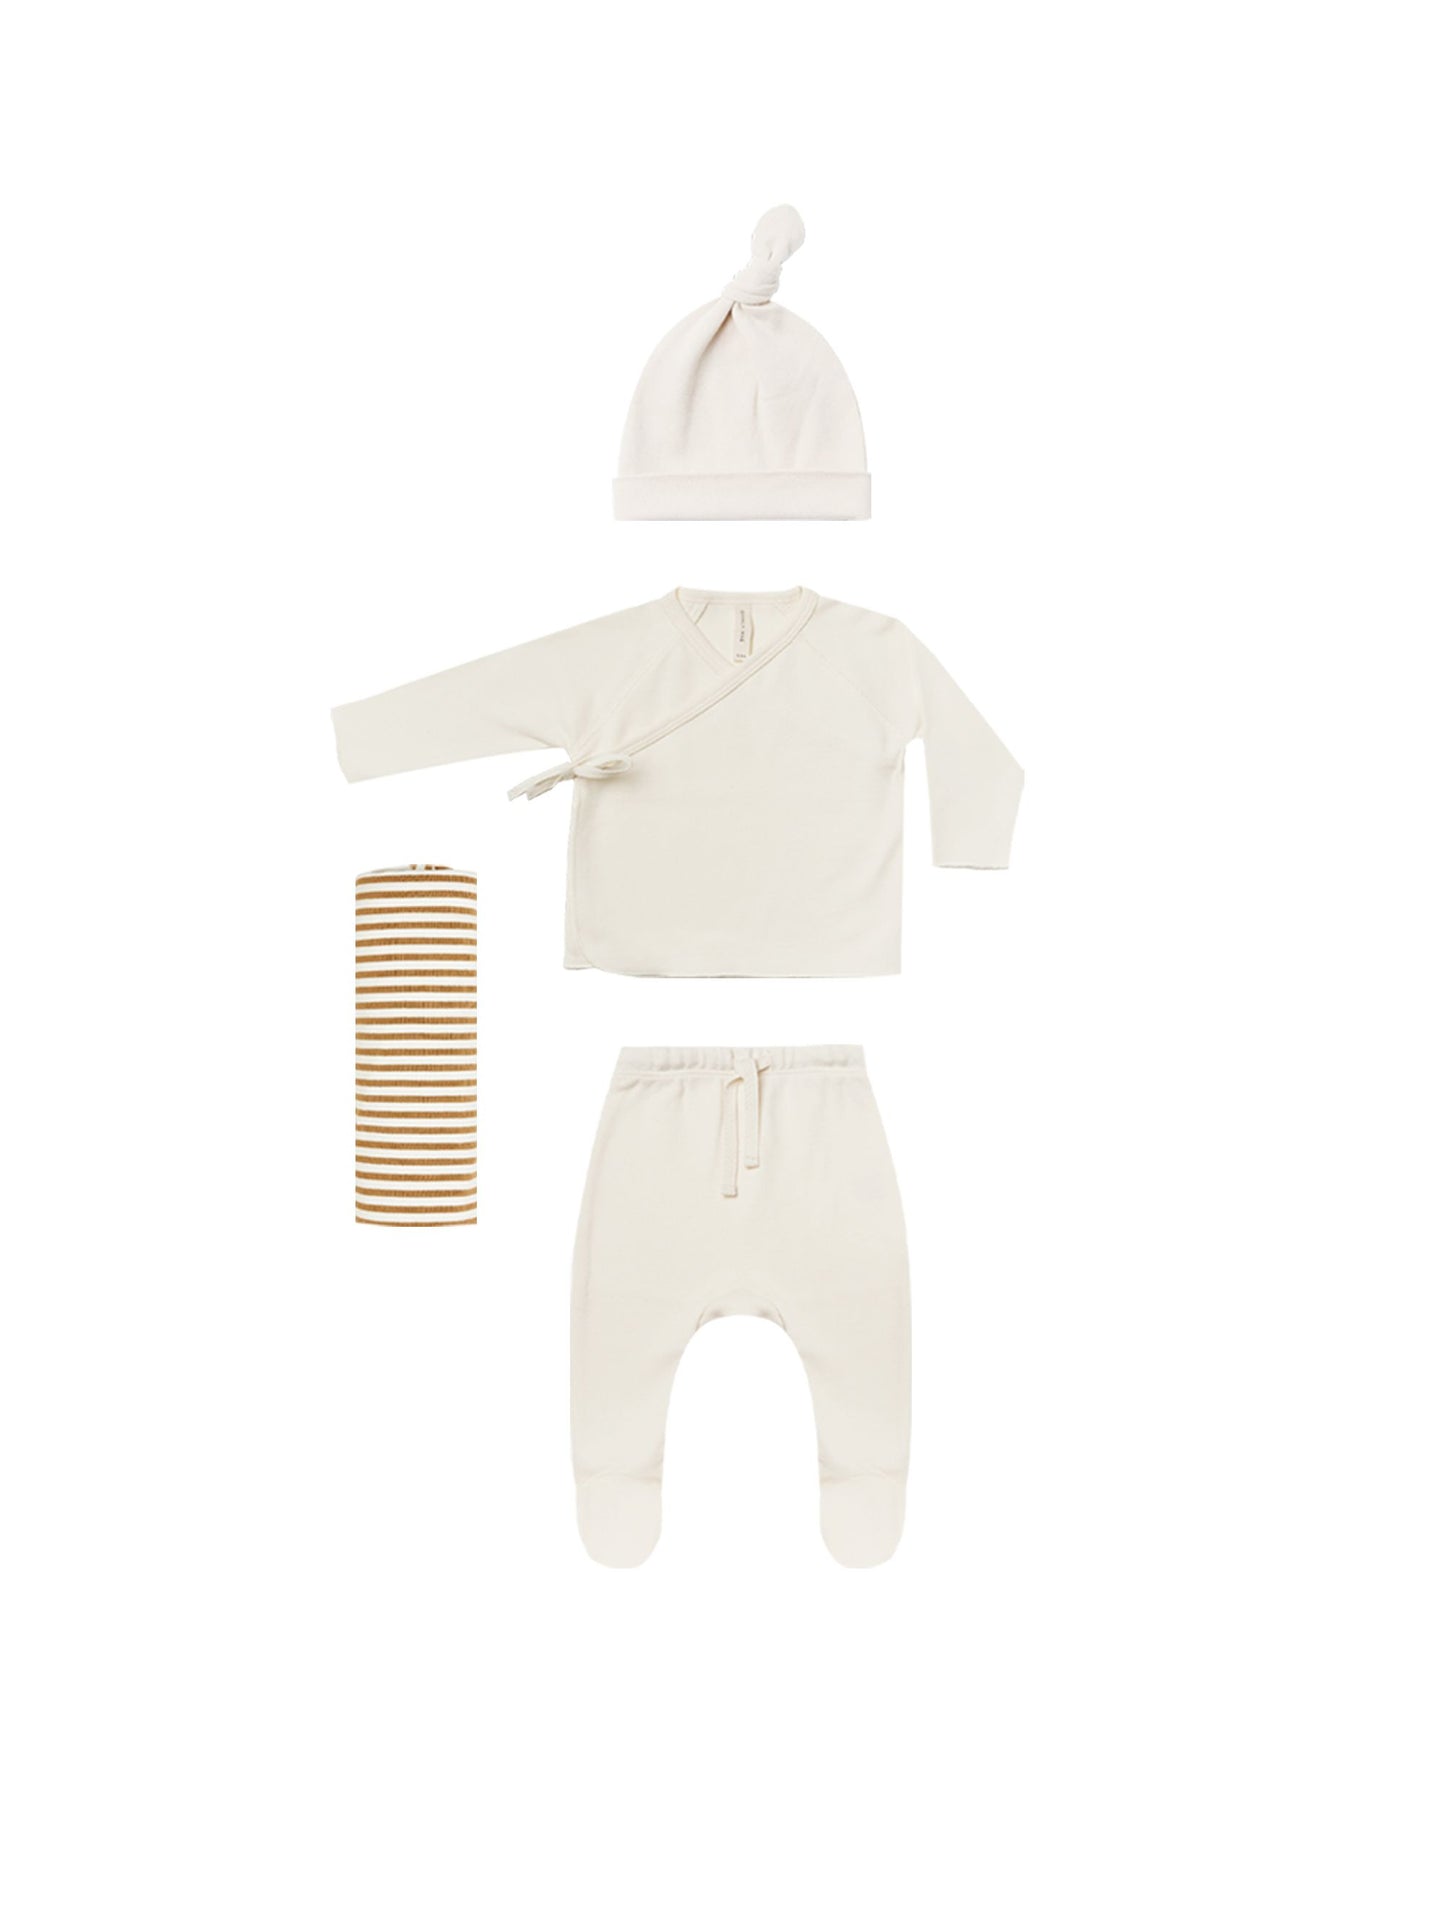 Quincy Mae - Welcome Home Baby Set (Ivory)